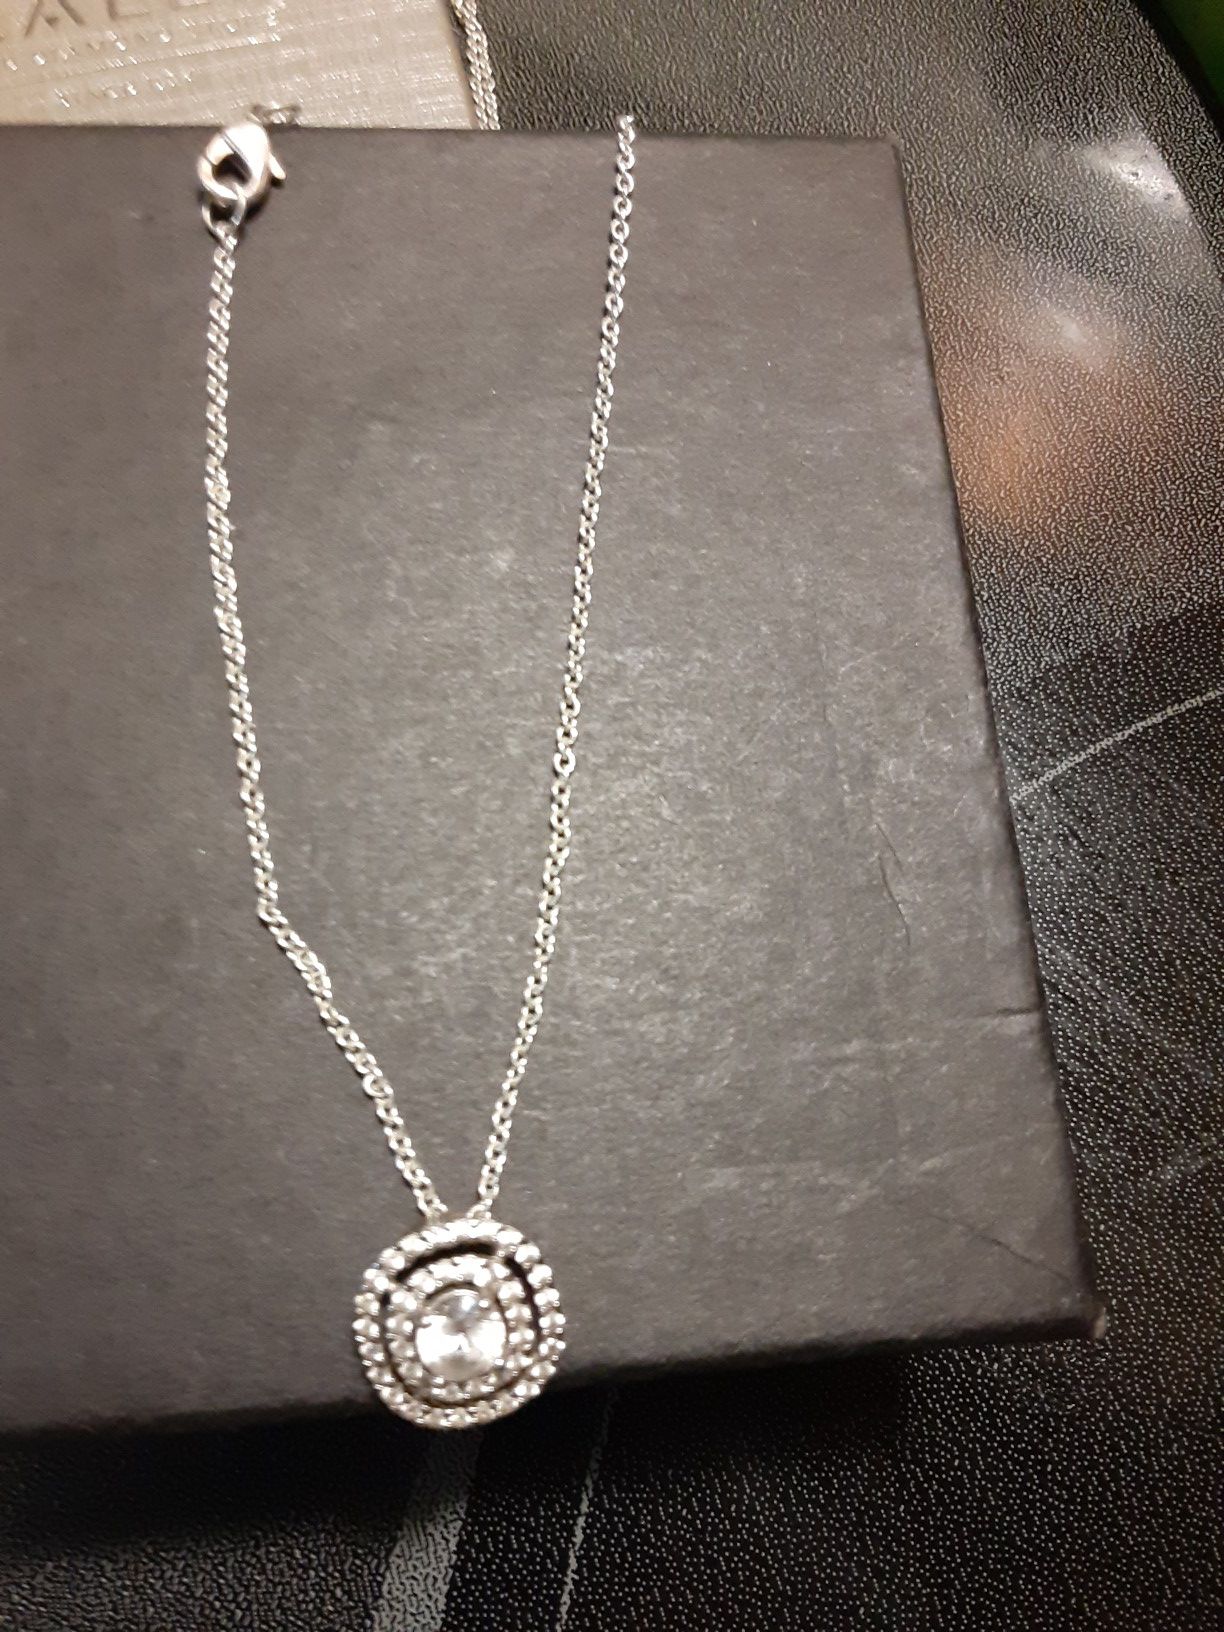 Real diamond necklace from kay jewelry